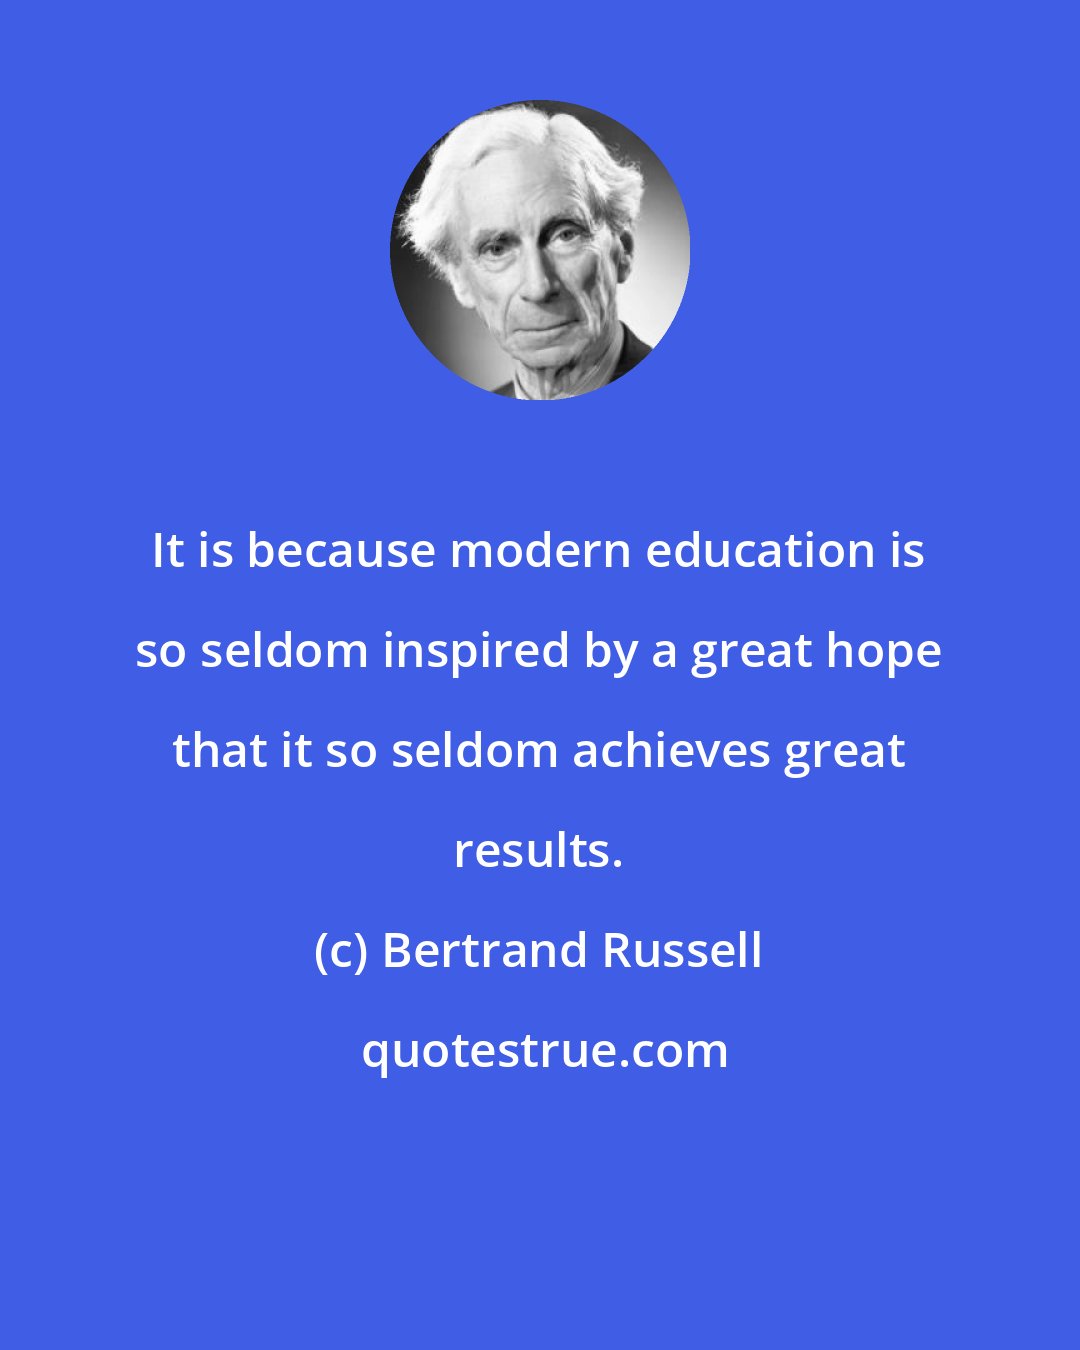 Bertrand Russell: It is because modern education is so seldom inspired by a great hope that it so seldom achieves great results.